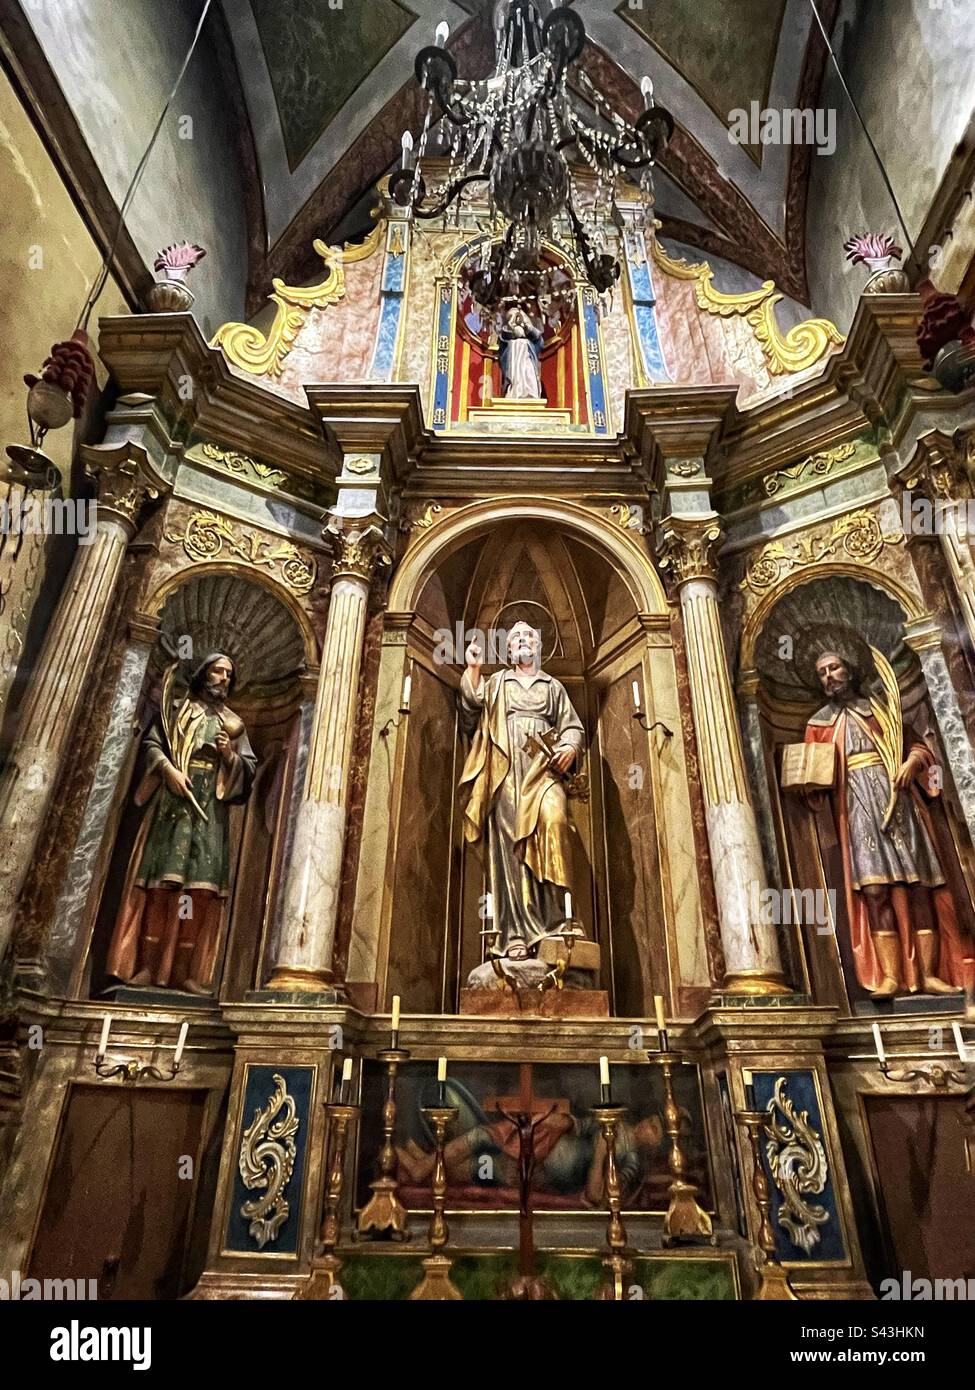 One of the many chapels in Església de Sant Bartomeu, Soller, Mallorca. This dedicated to St Peter or San Pere, the patron saint of fishermen. Stock Photo